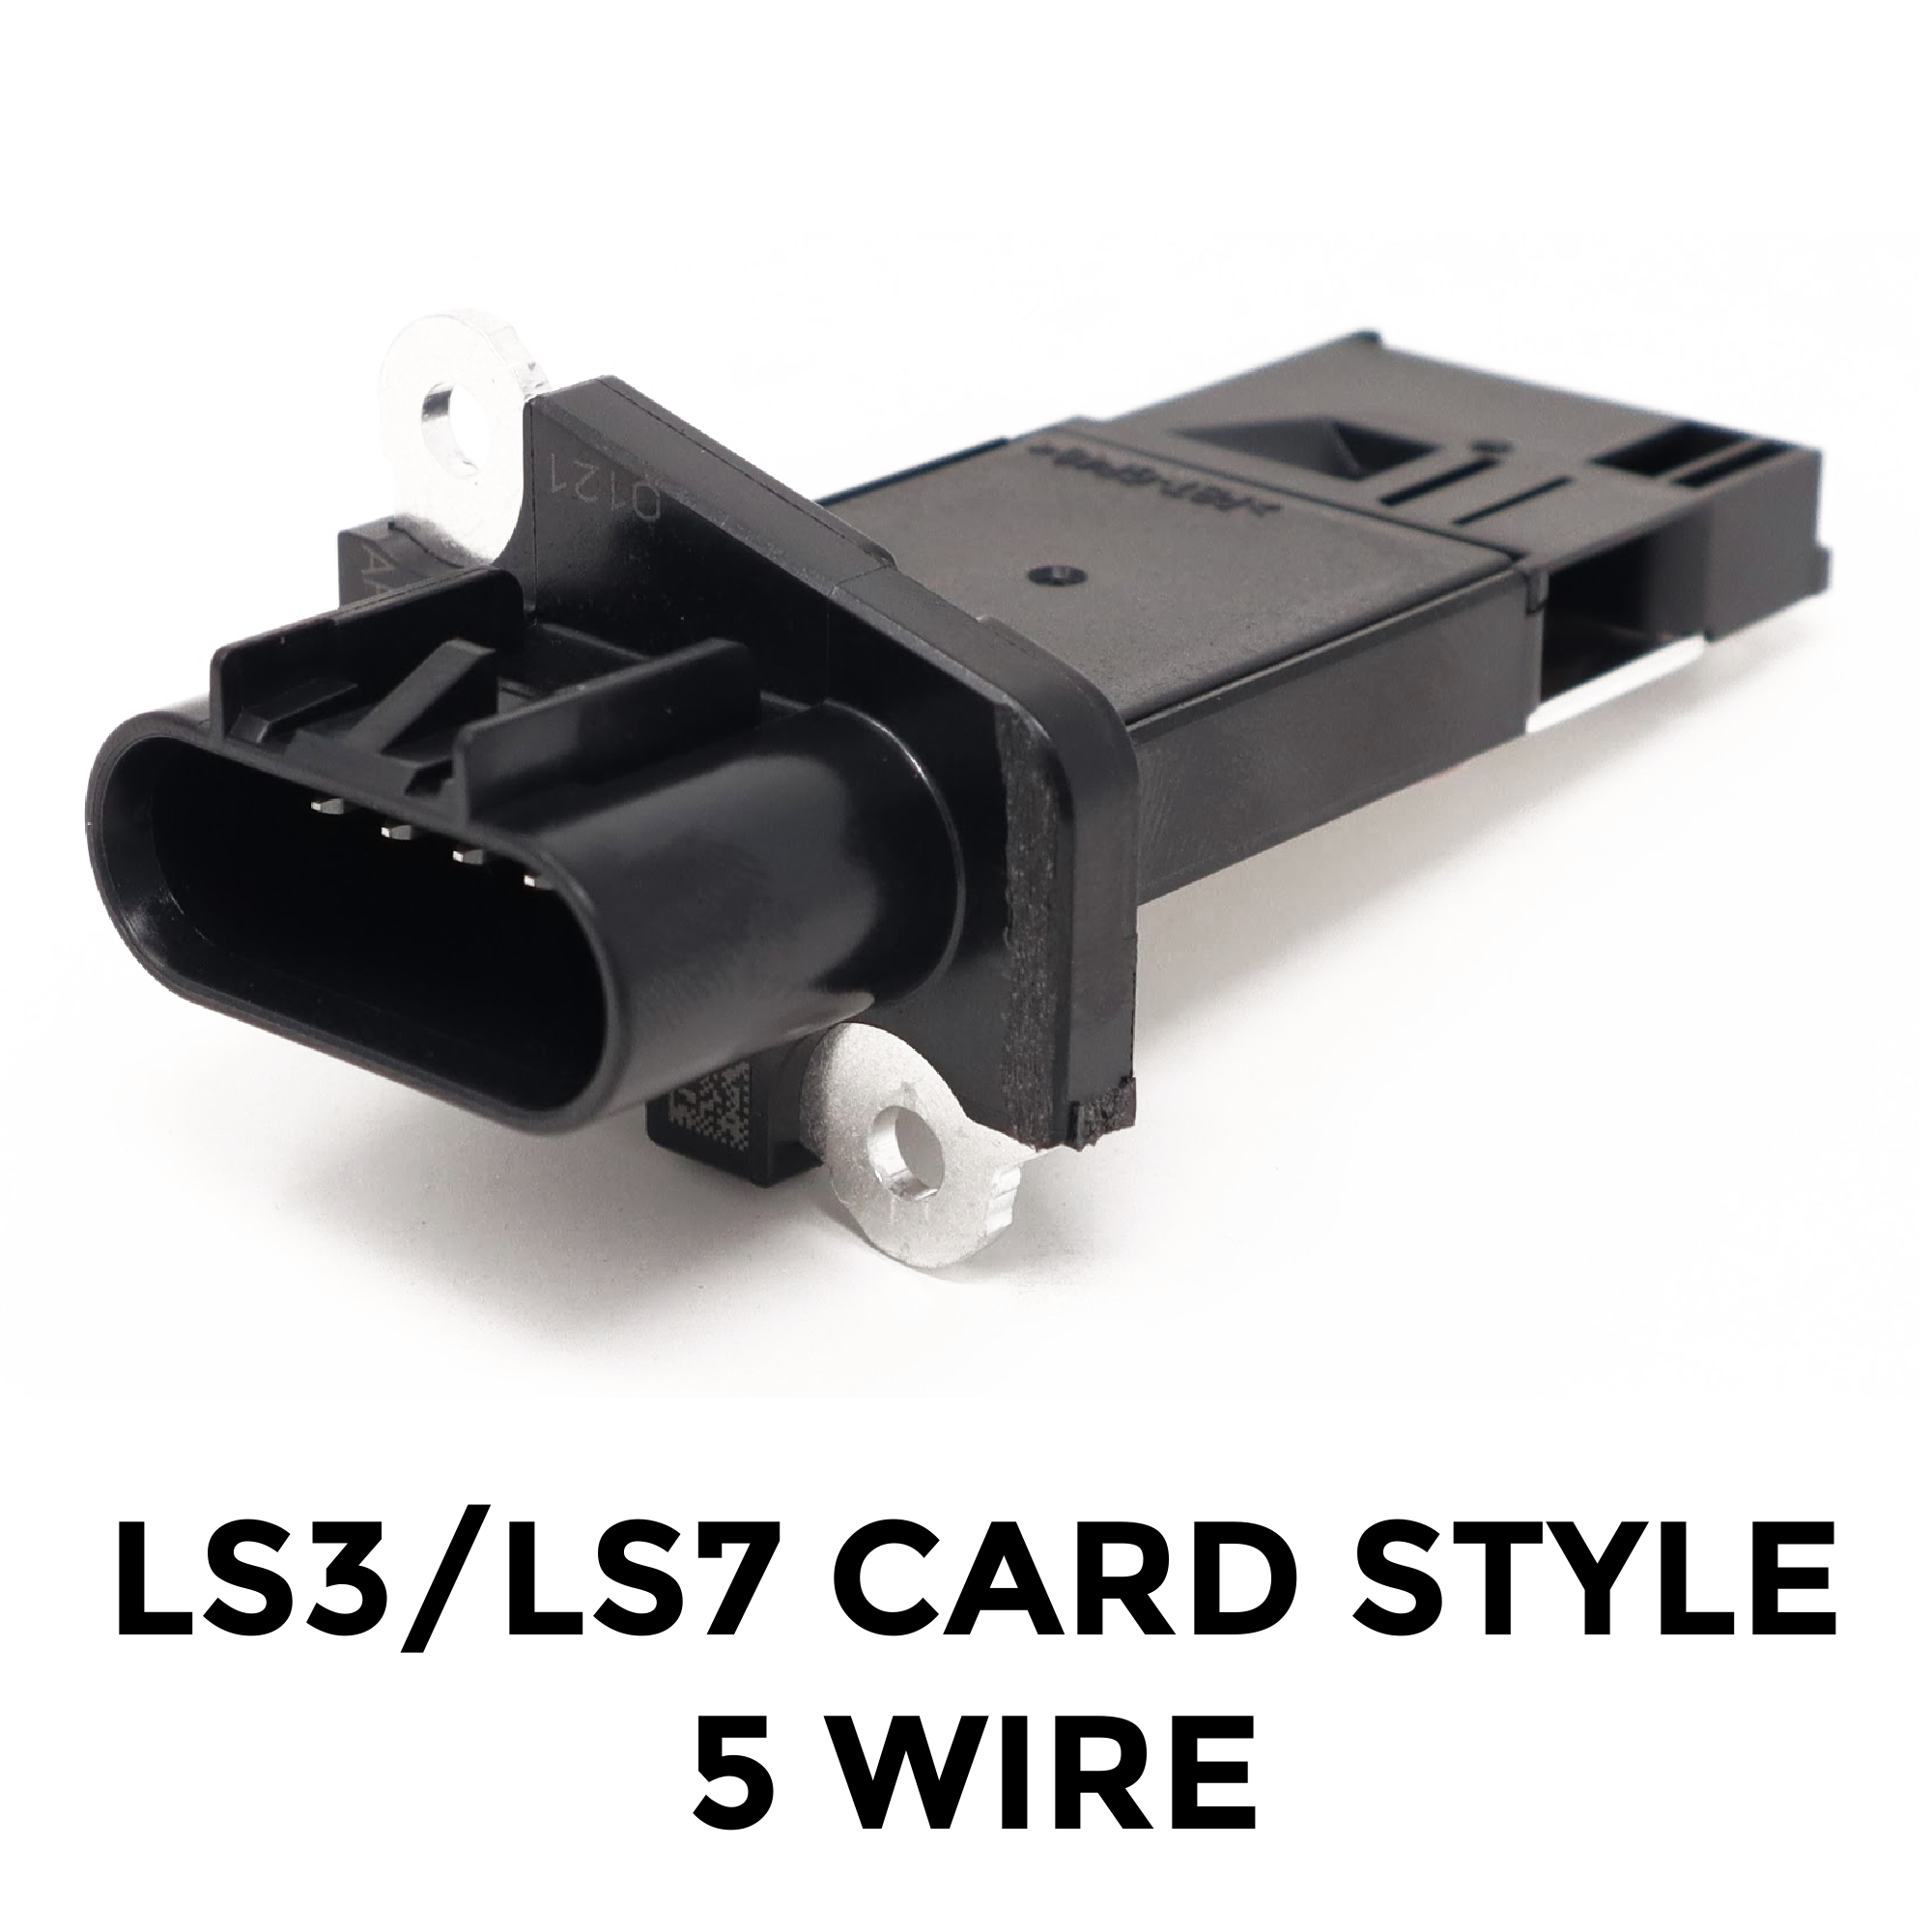 LS3/LS7 Card Style 5 Wire